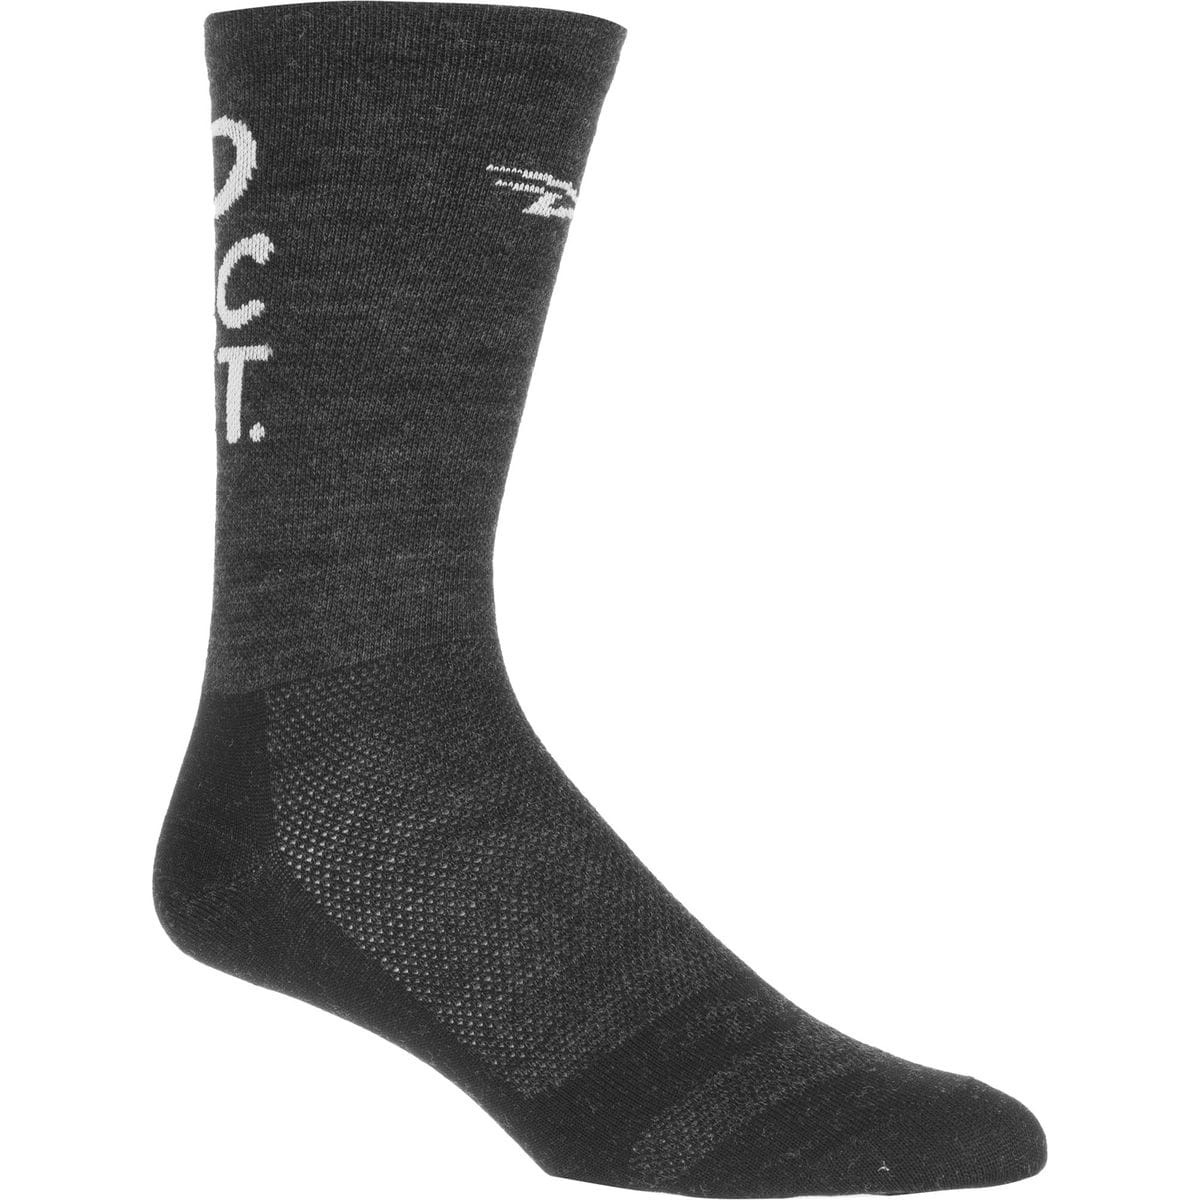 DeFeet Wooleator Do Epic Shit 6in Sock Mens